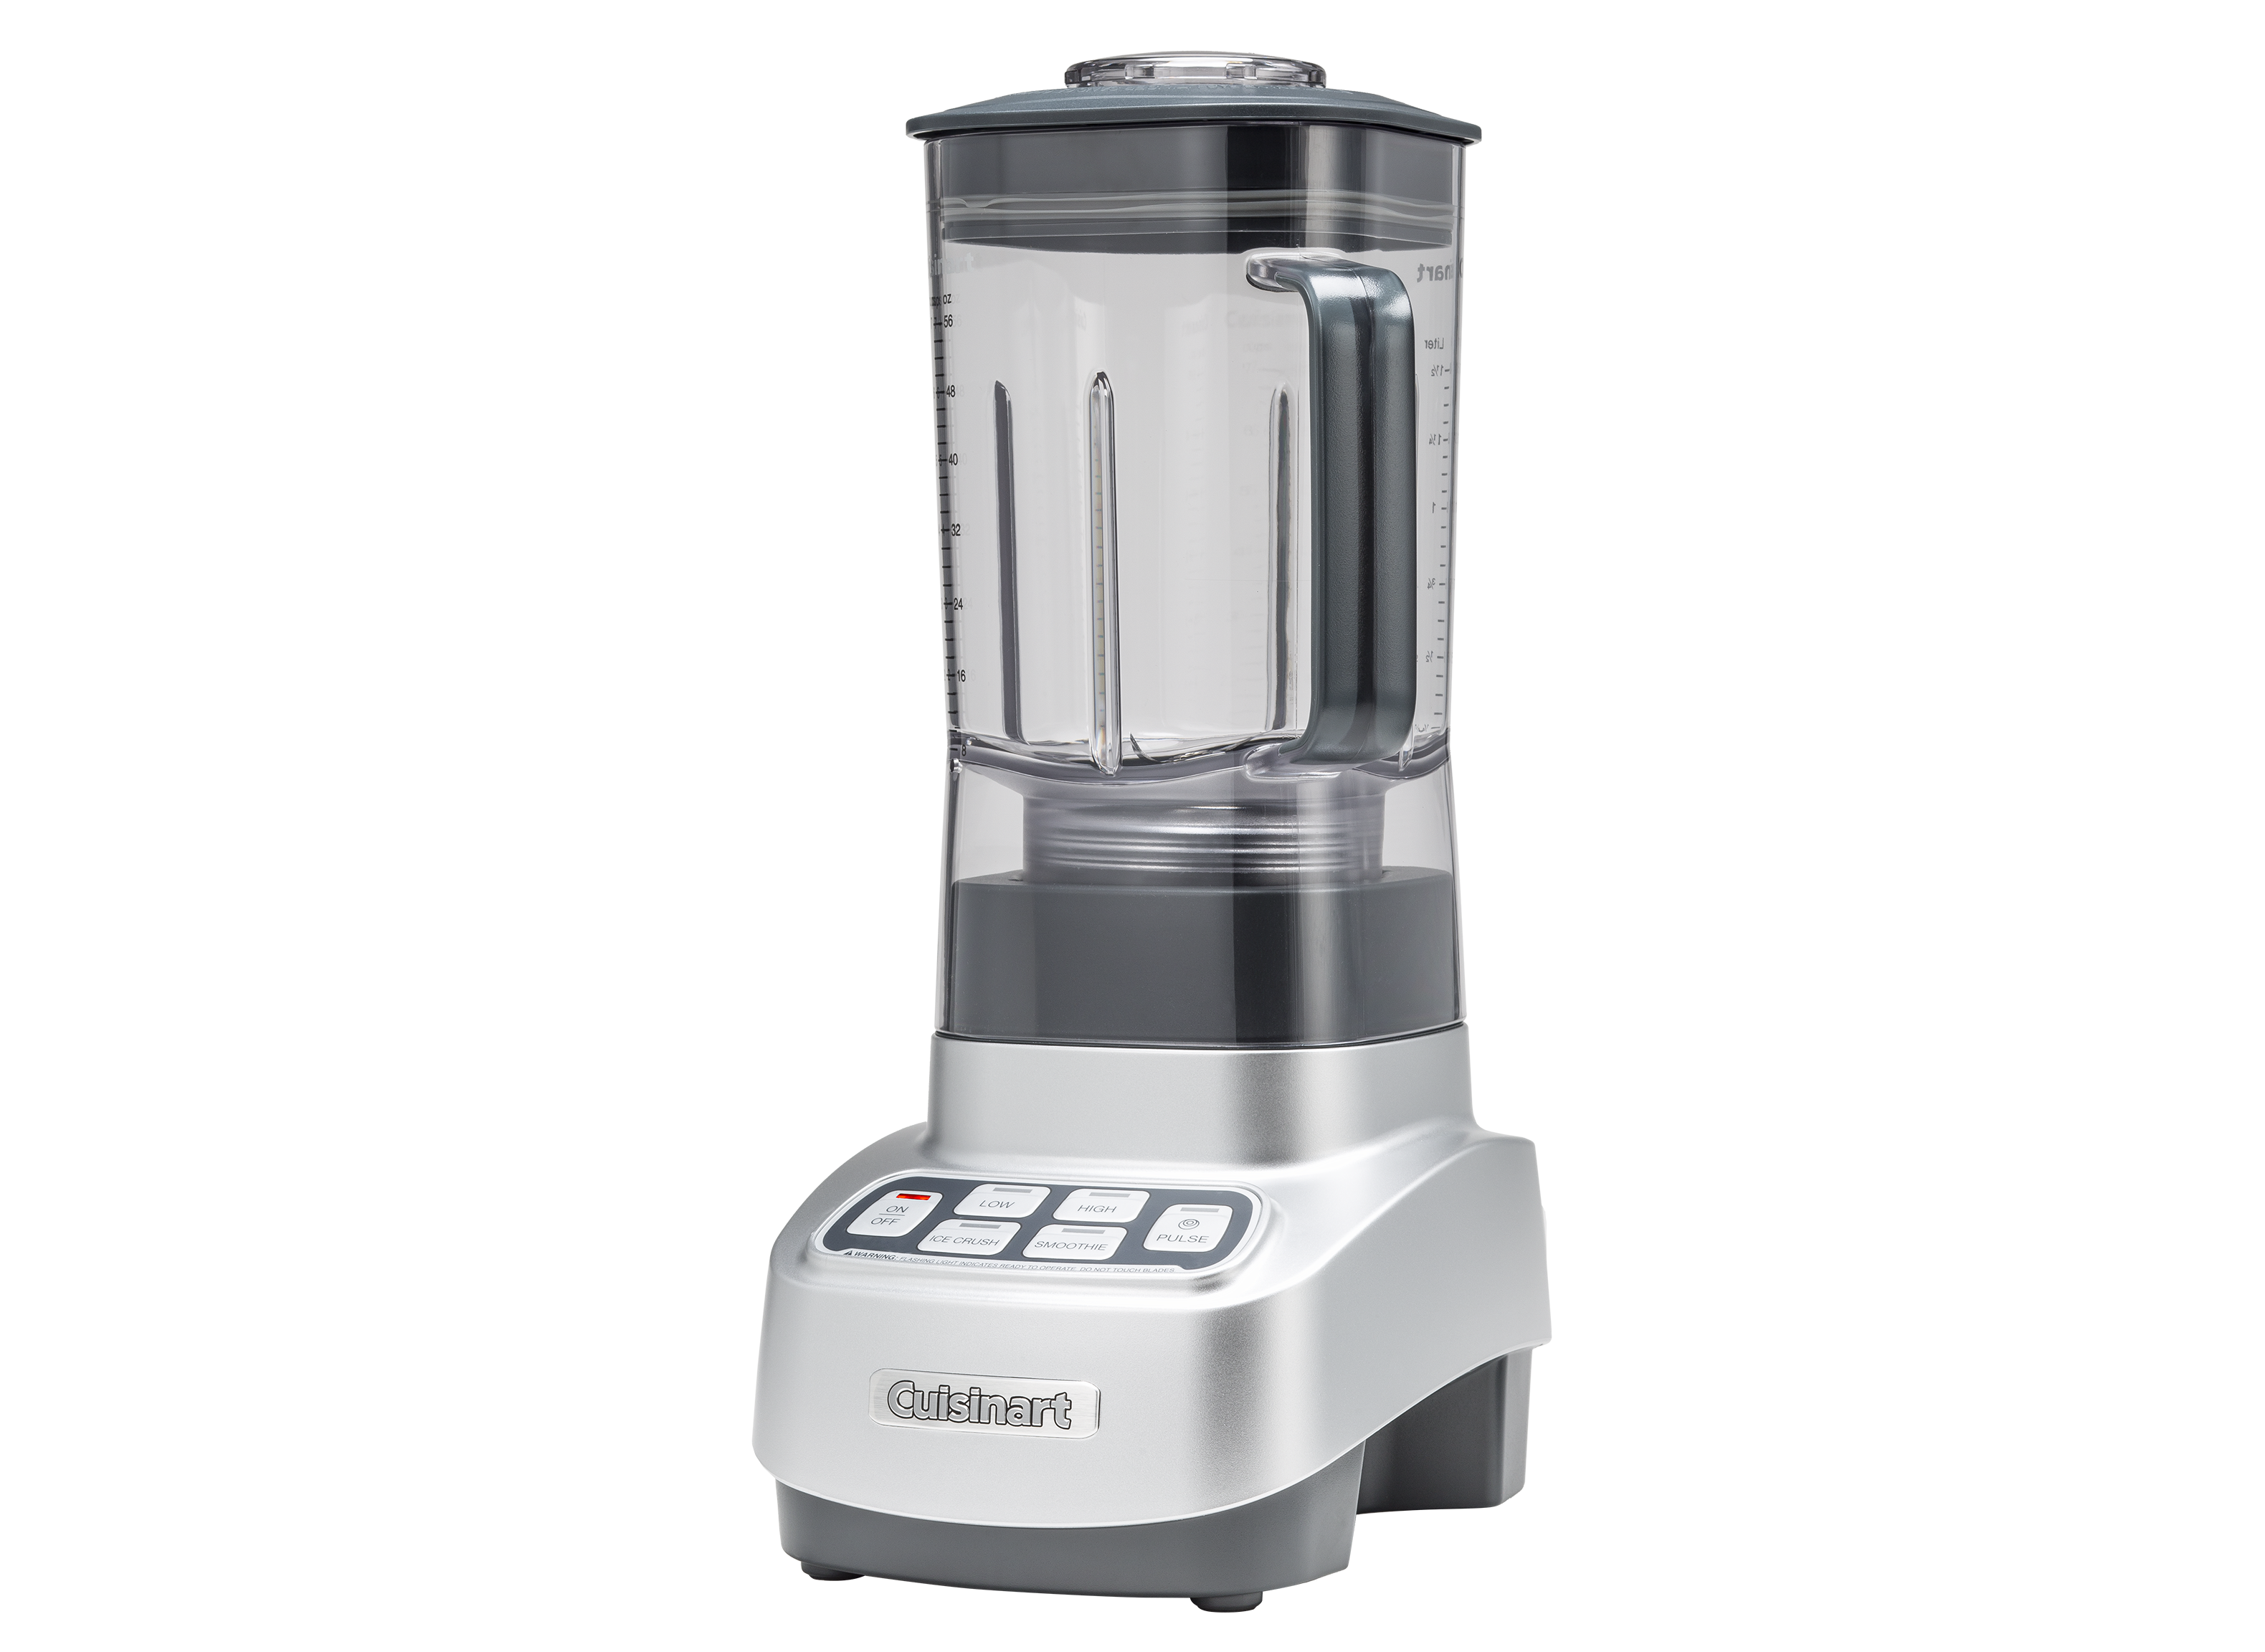 https://crdms.images.consumerreports.org/prod/products/cr/models/393896-blenders-cuisinart-velocityultratriobfp650.png